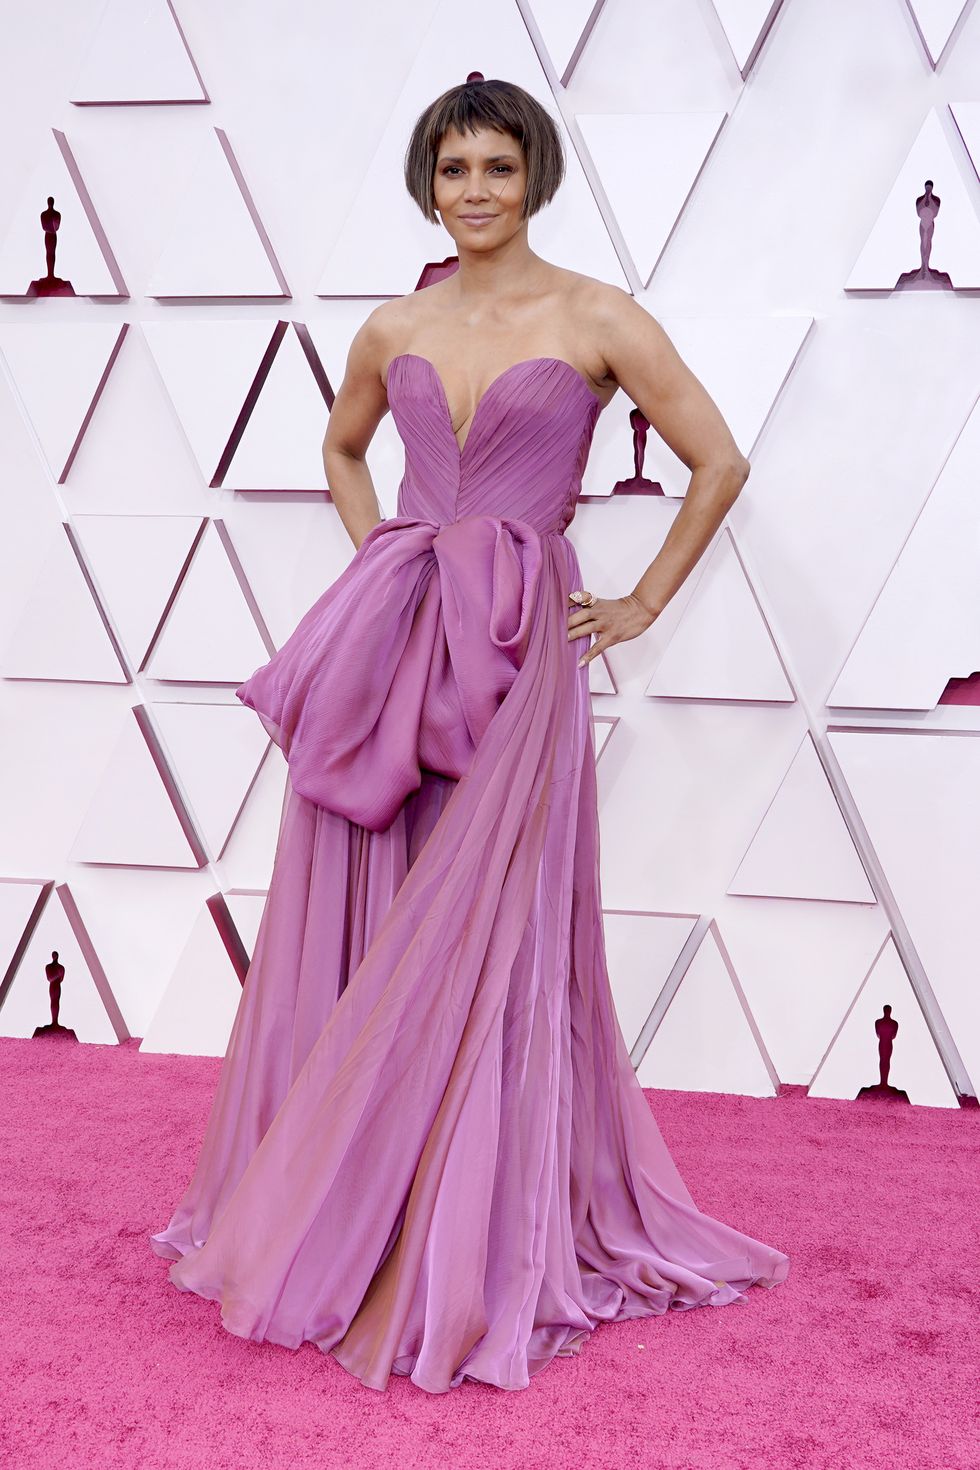 halle berry at the oscars in 2021